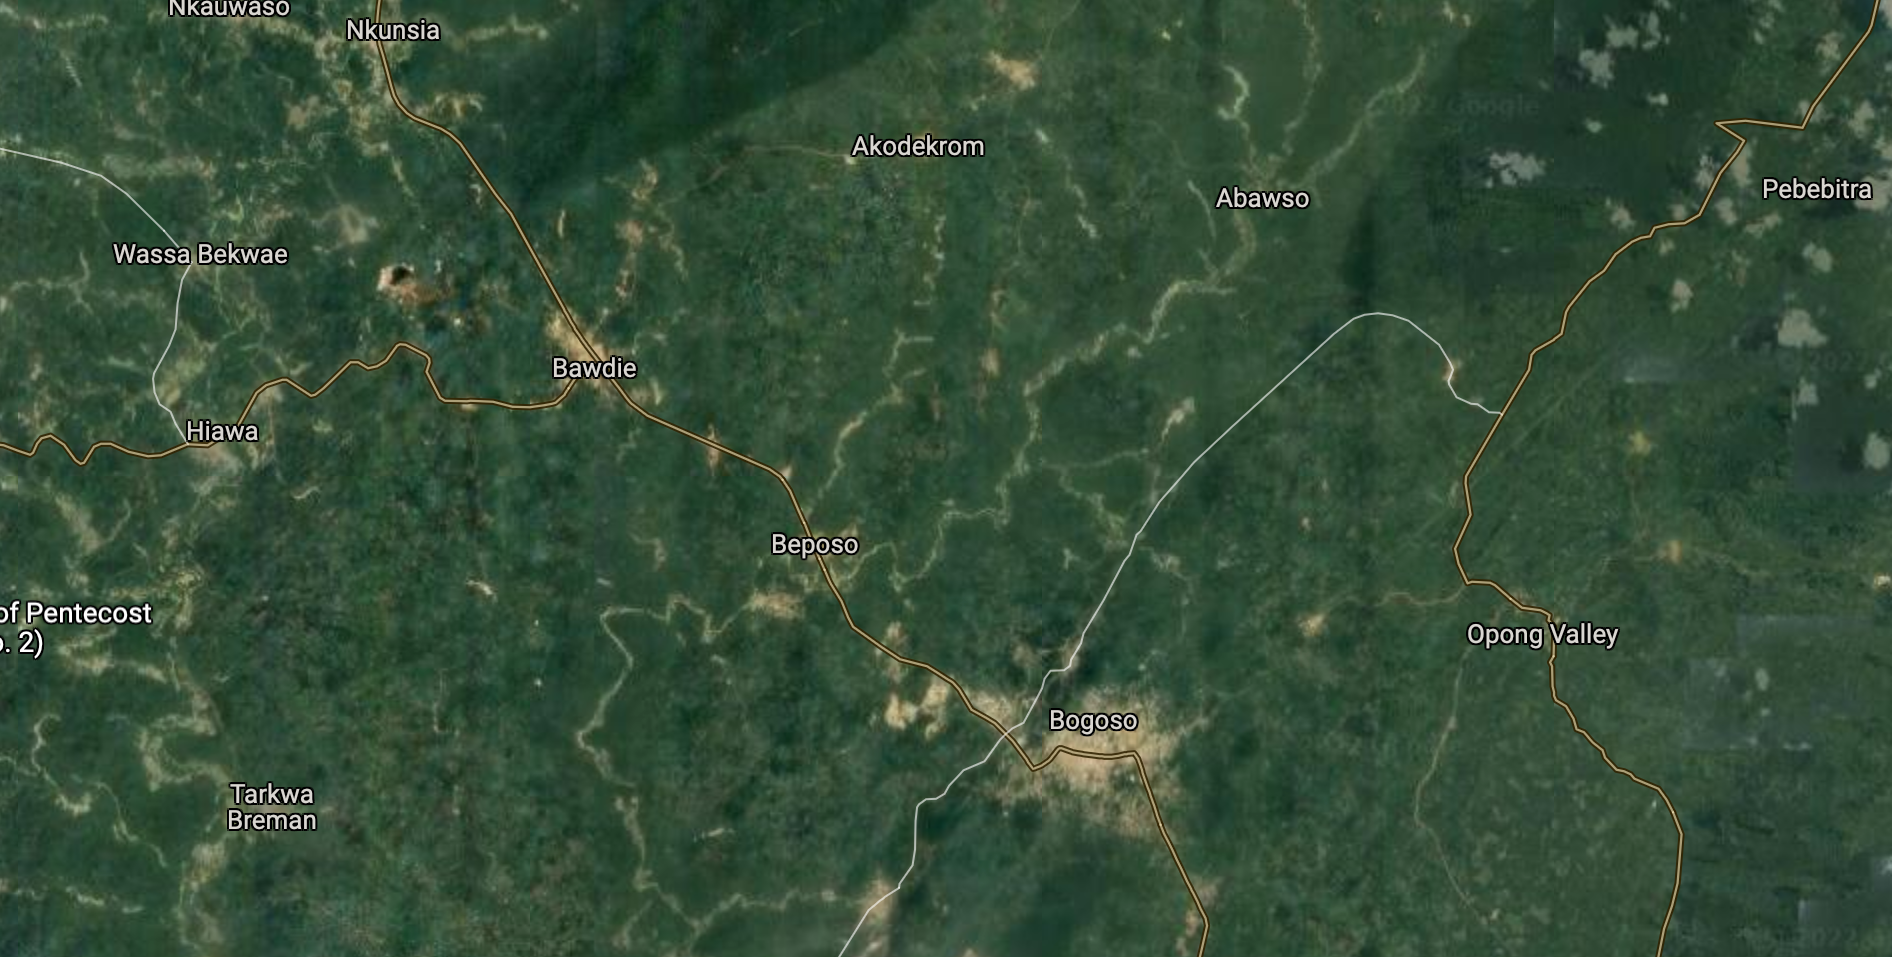 A screenshot showing an aerial view of Ghana’s western region. An explosion occurred today in Apiate, located between the towns Bogoso and Bawdie.